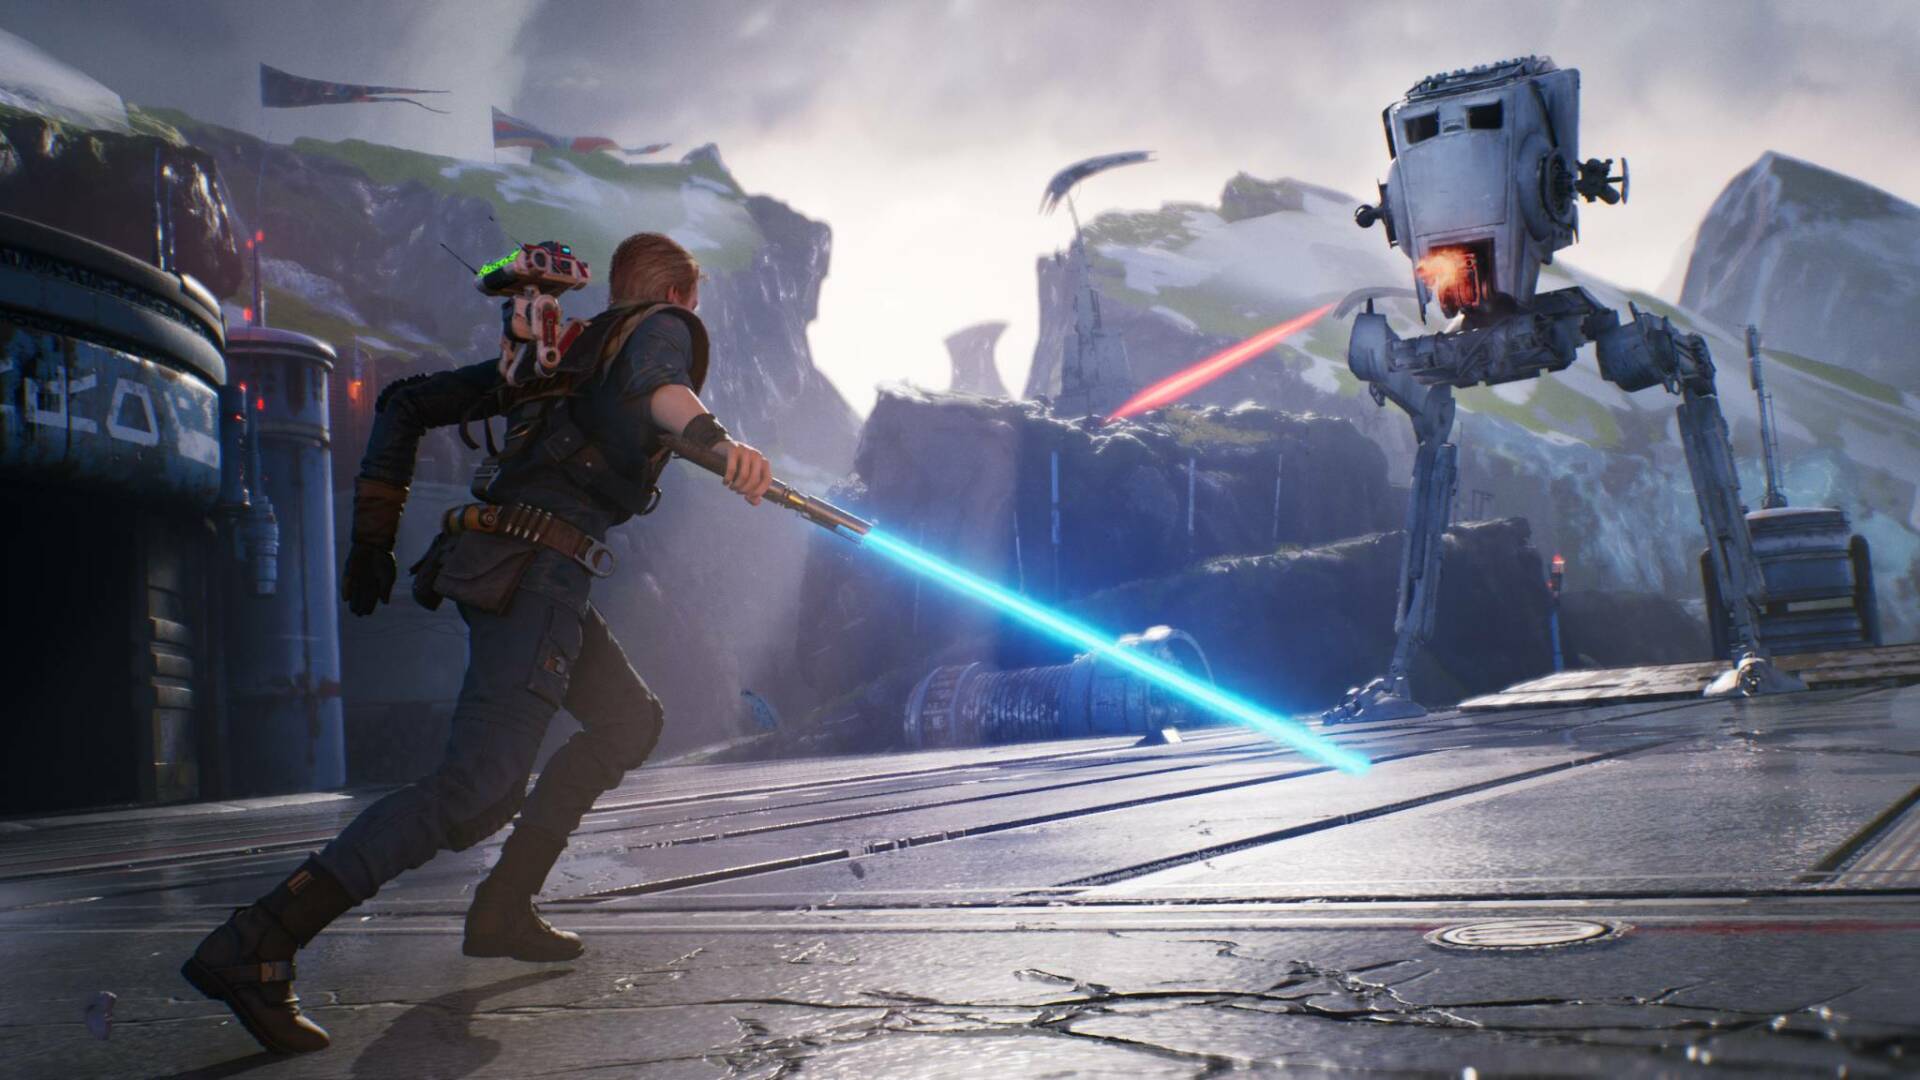 Is Star Wars Jedi Fallen Order 2 Real? Check a possible release date